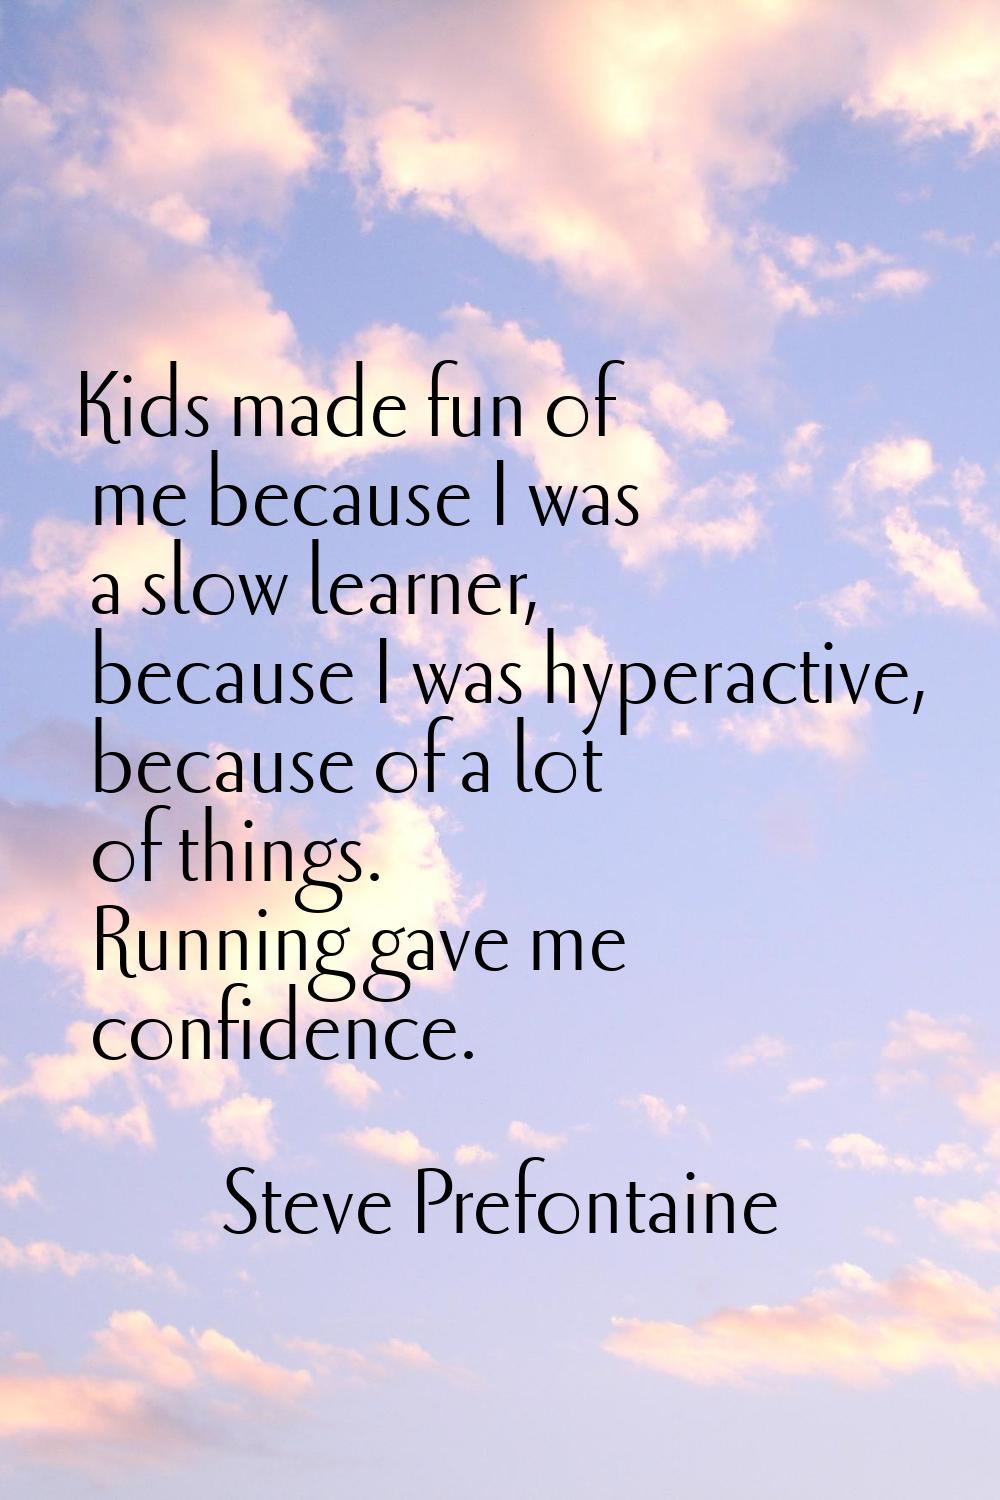 Kids made fun of me because I was a slow learner, because I was hyperactive, because of a lot of th